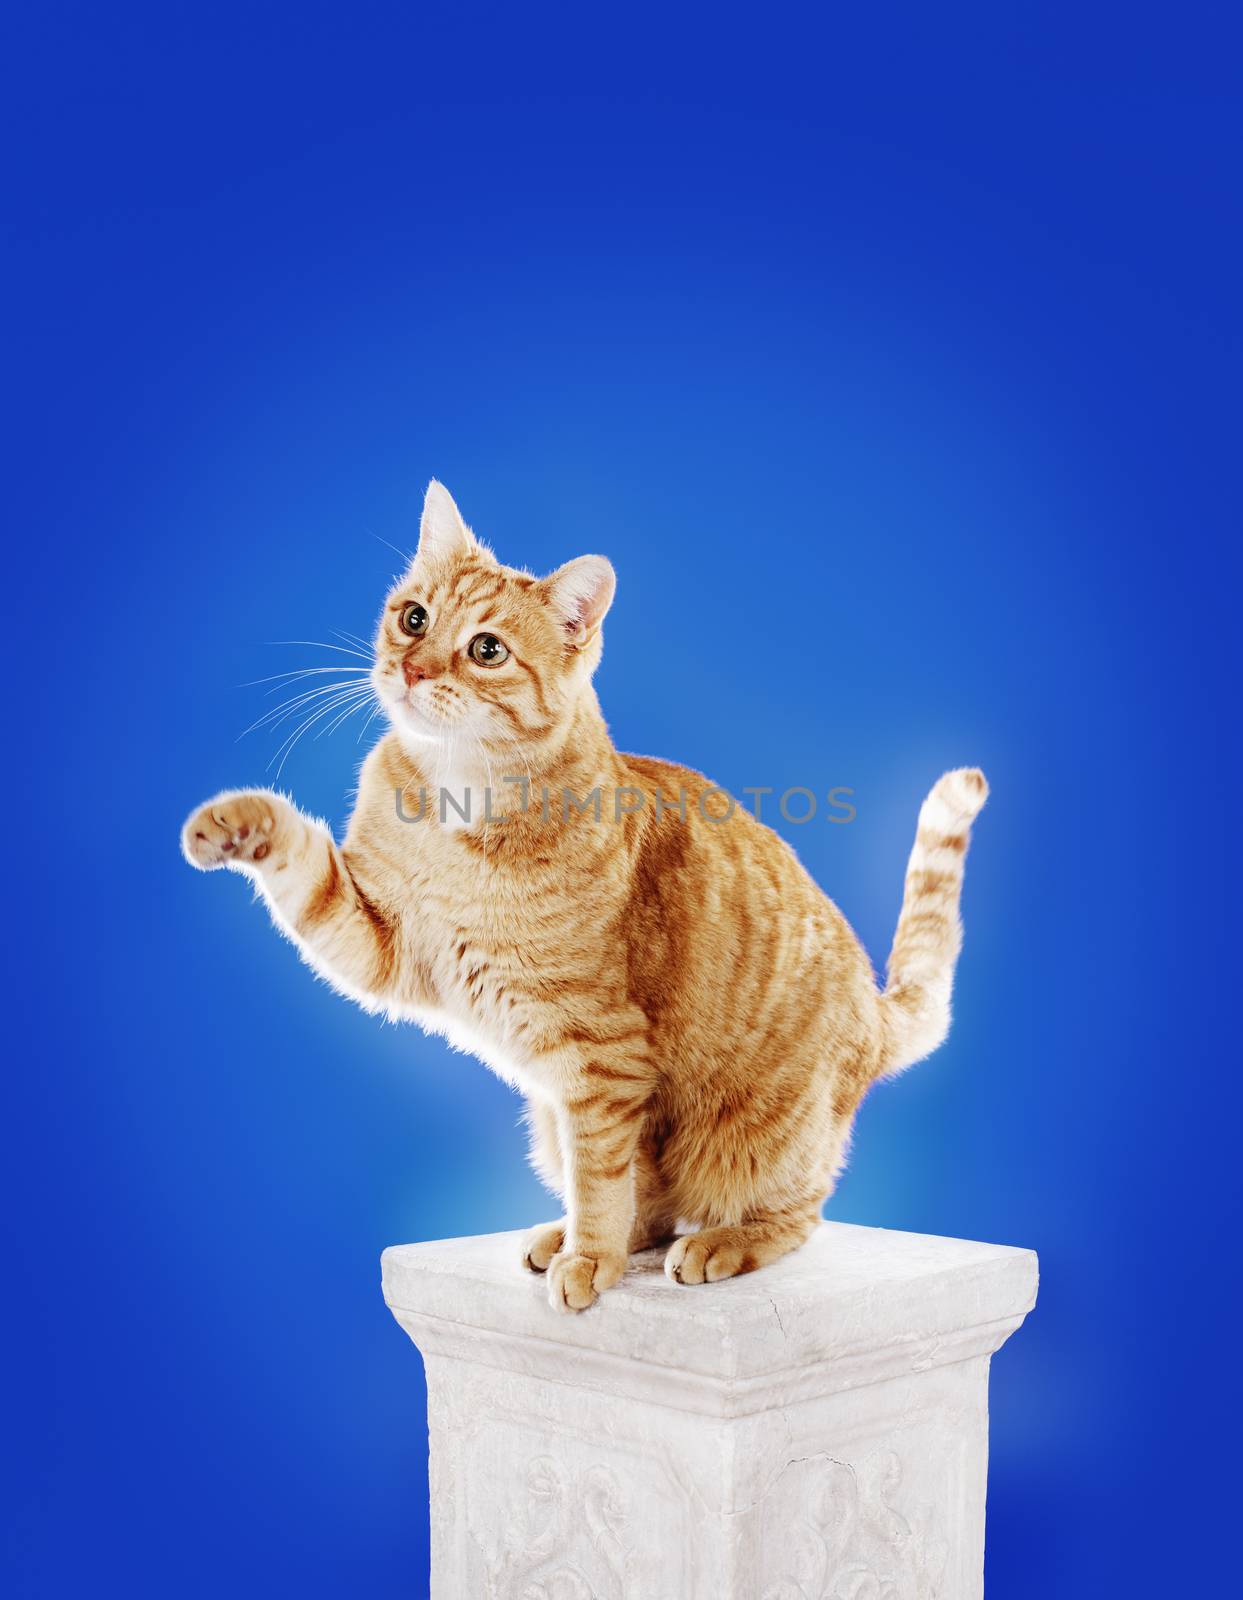 Senior (10 years) domestic ginger cat sitting on a column and lifting front paw.